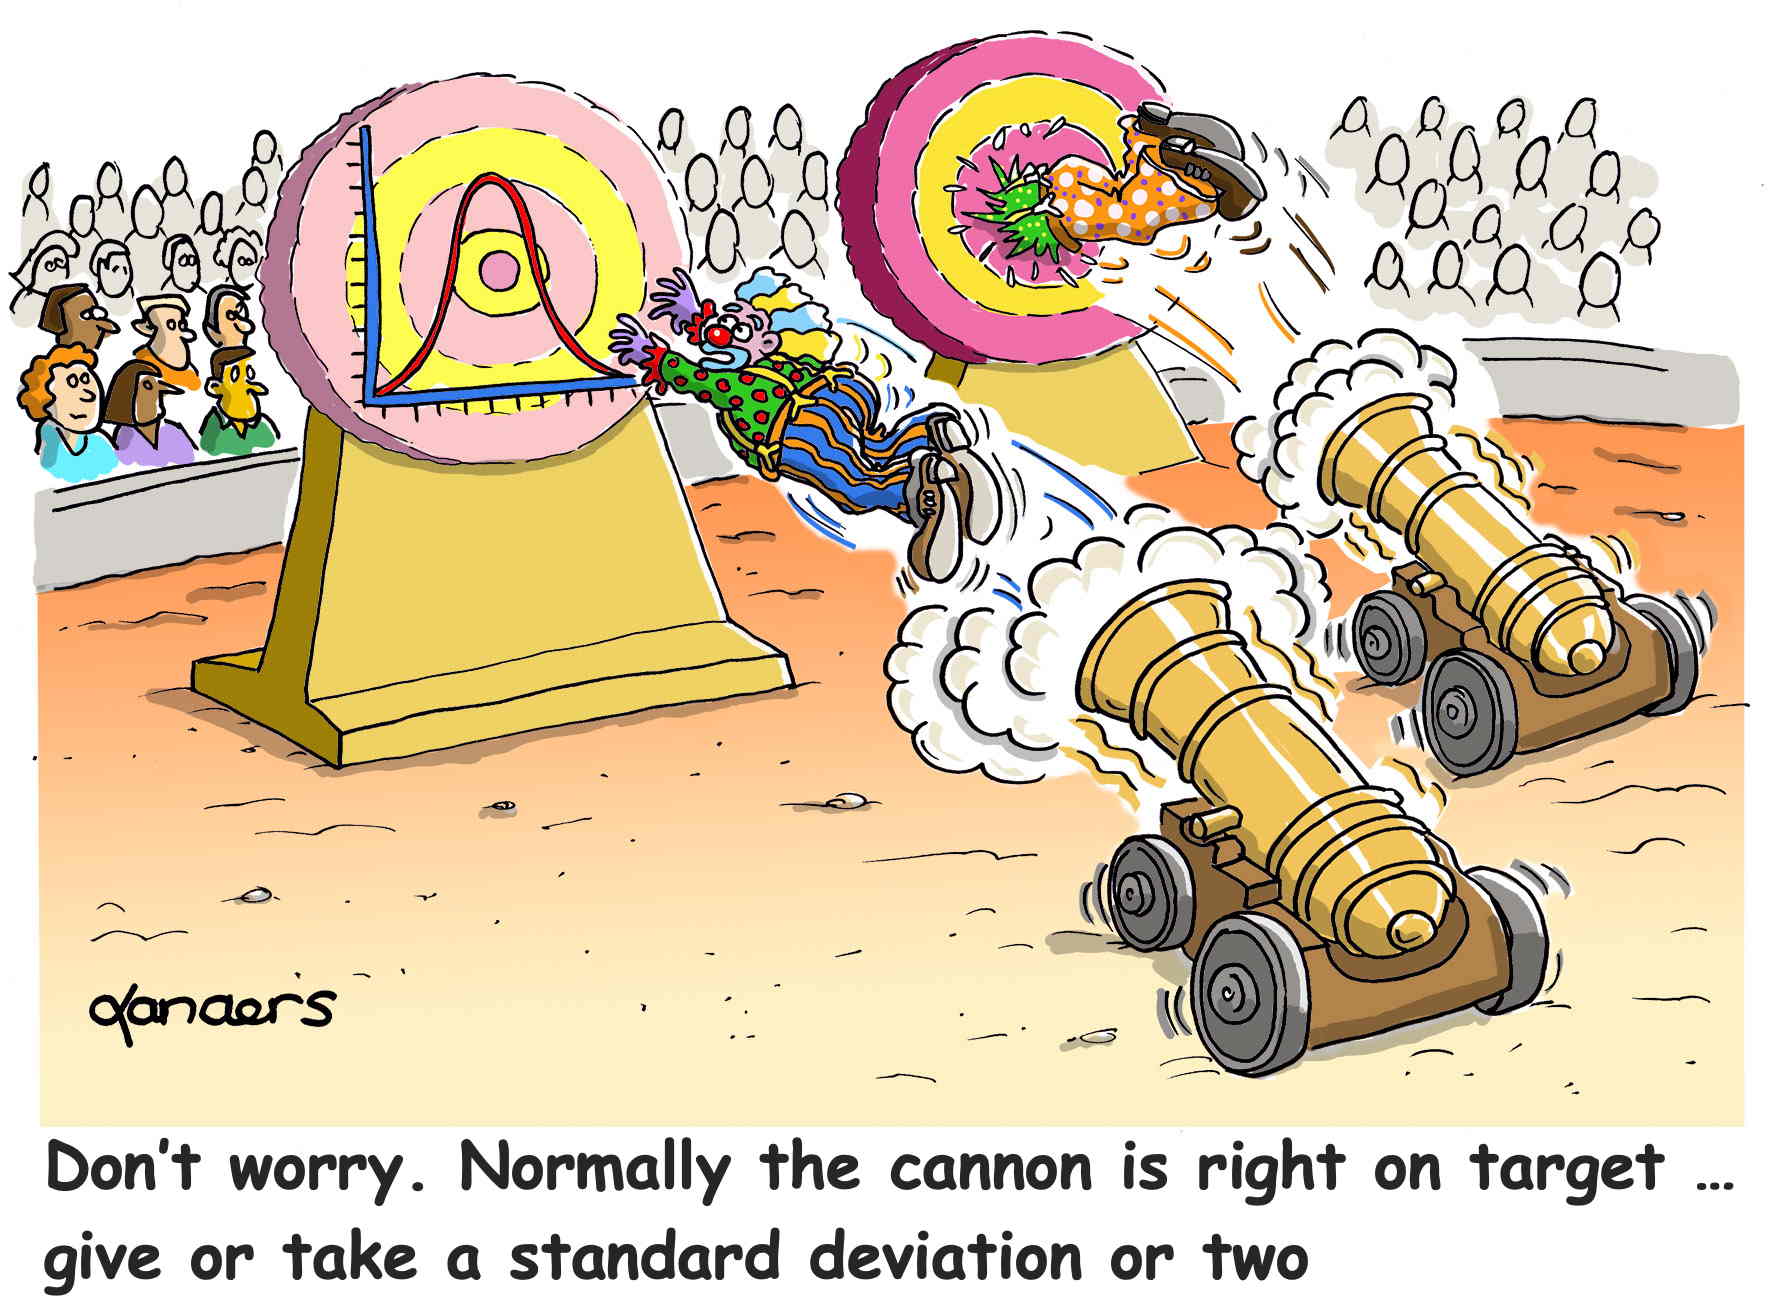 cartoon with two clowns being shot out of a cannon, one toward a regular target the other with a target showing the normal curve. Caption says: Don't worry. Normally the cannon is right on target ... give or take a standard deviation or two